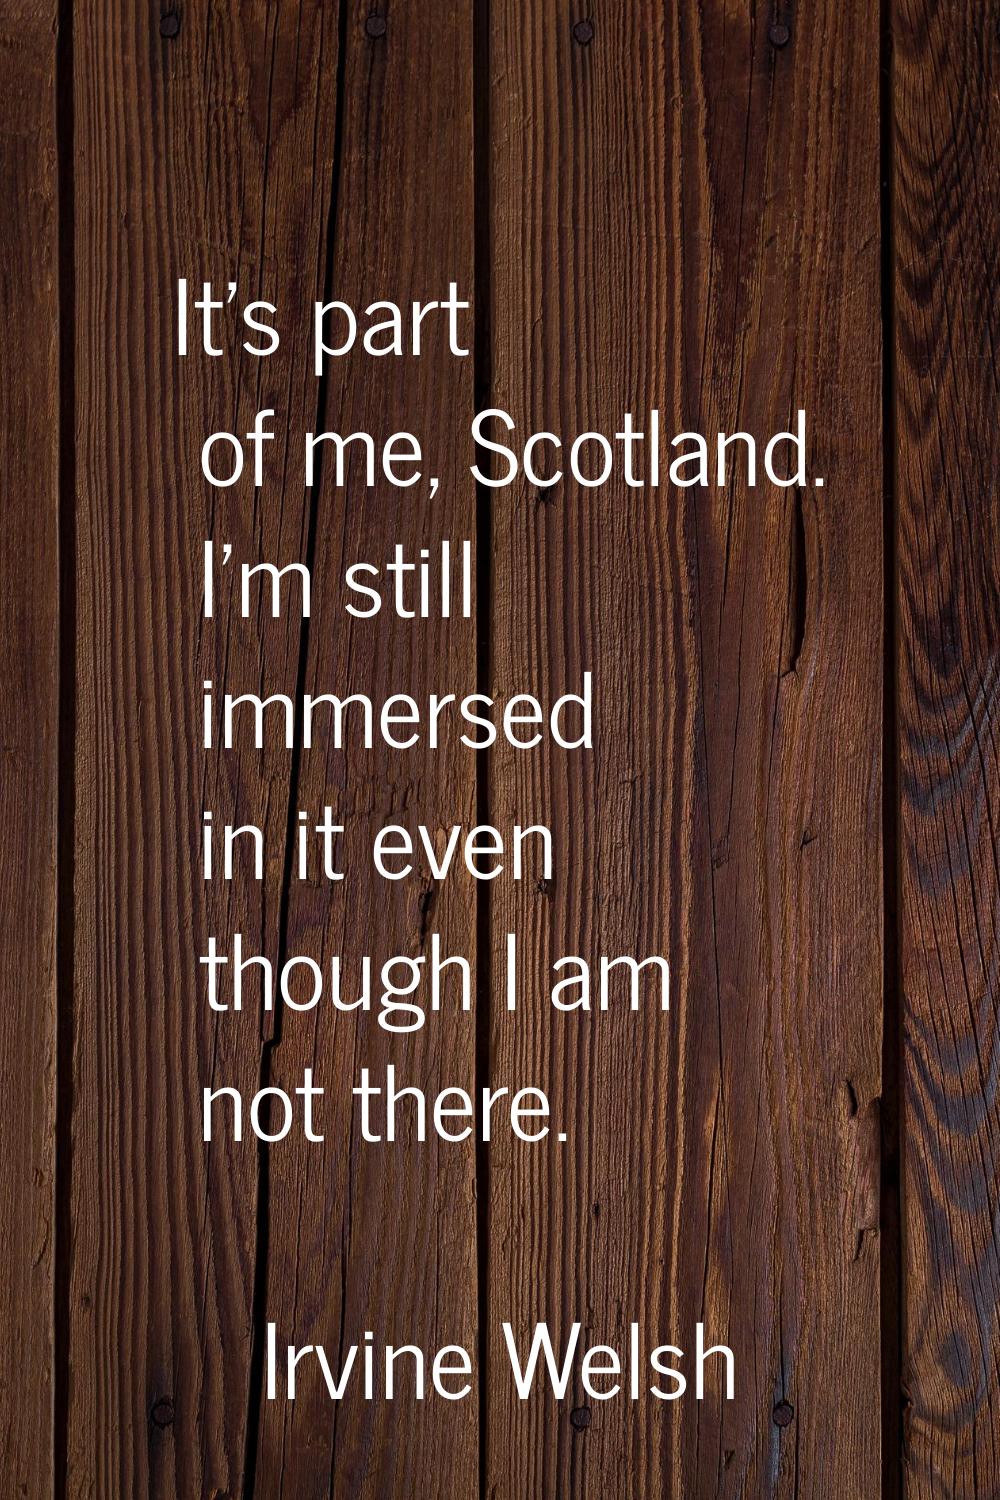 It's part of me, Scotland. I'm still immersed in it even though I am not there.